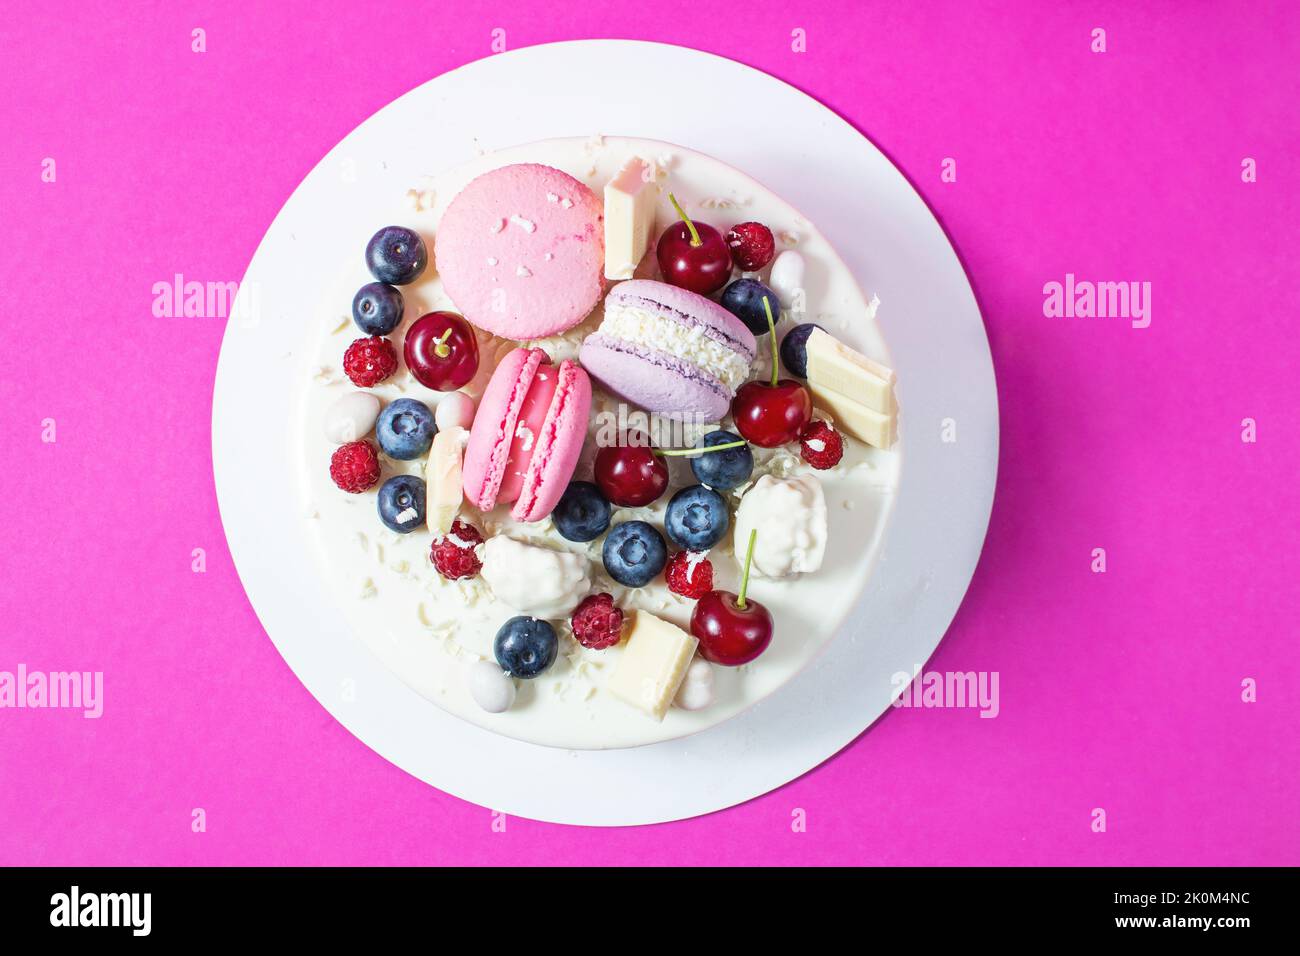 Tender white cake decorated with melted white chocolate, macaroons, meringues, berries and candies on pink background. Top view Stock Photo